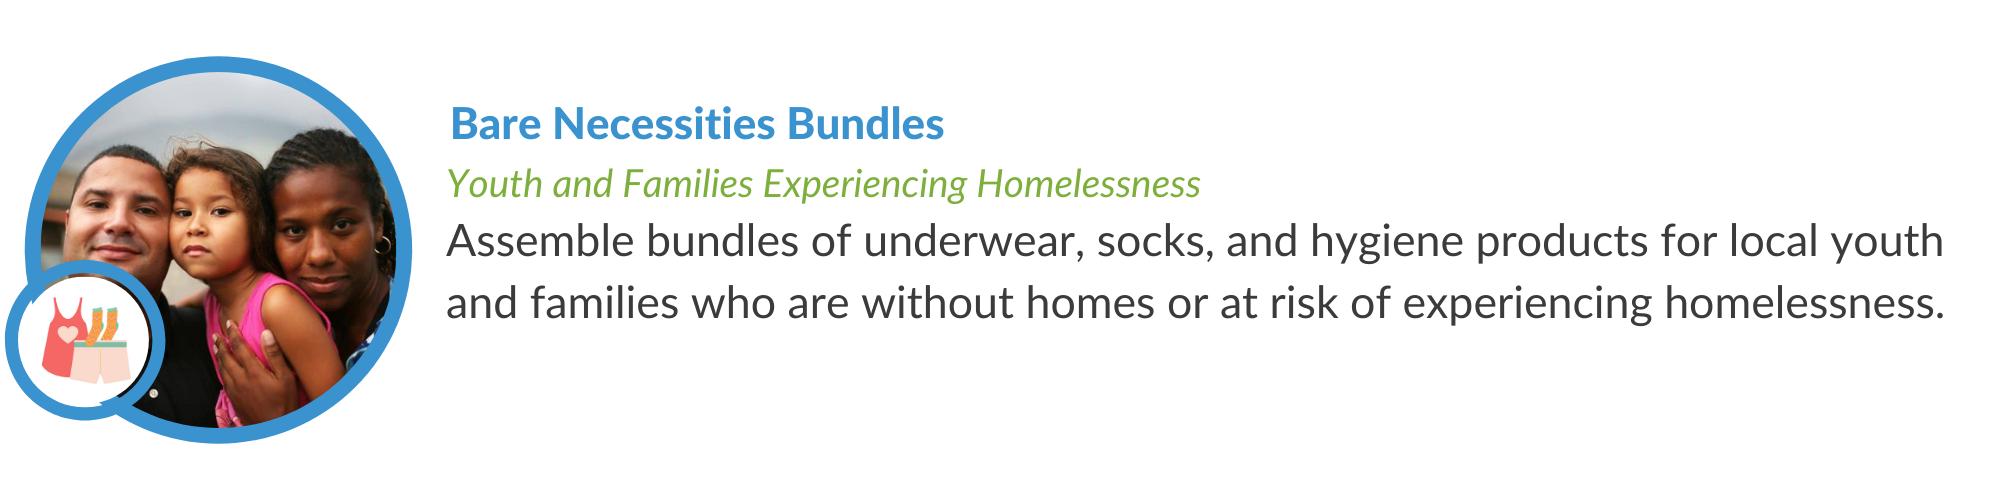 Basic Essentials for Youth and Families Experiencing Homelessness